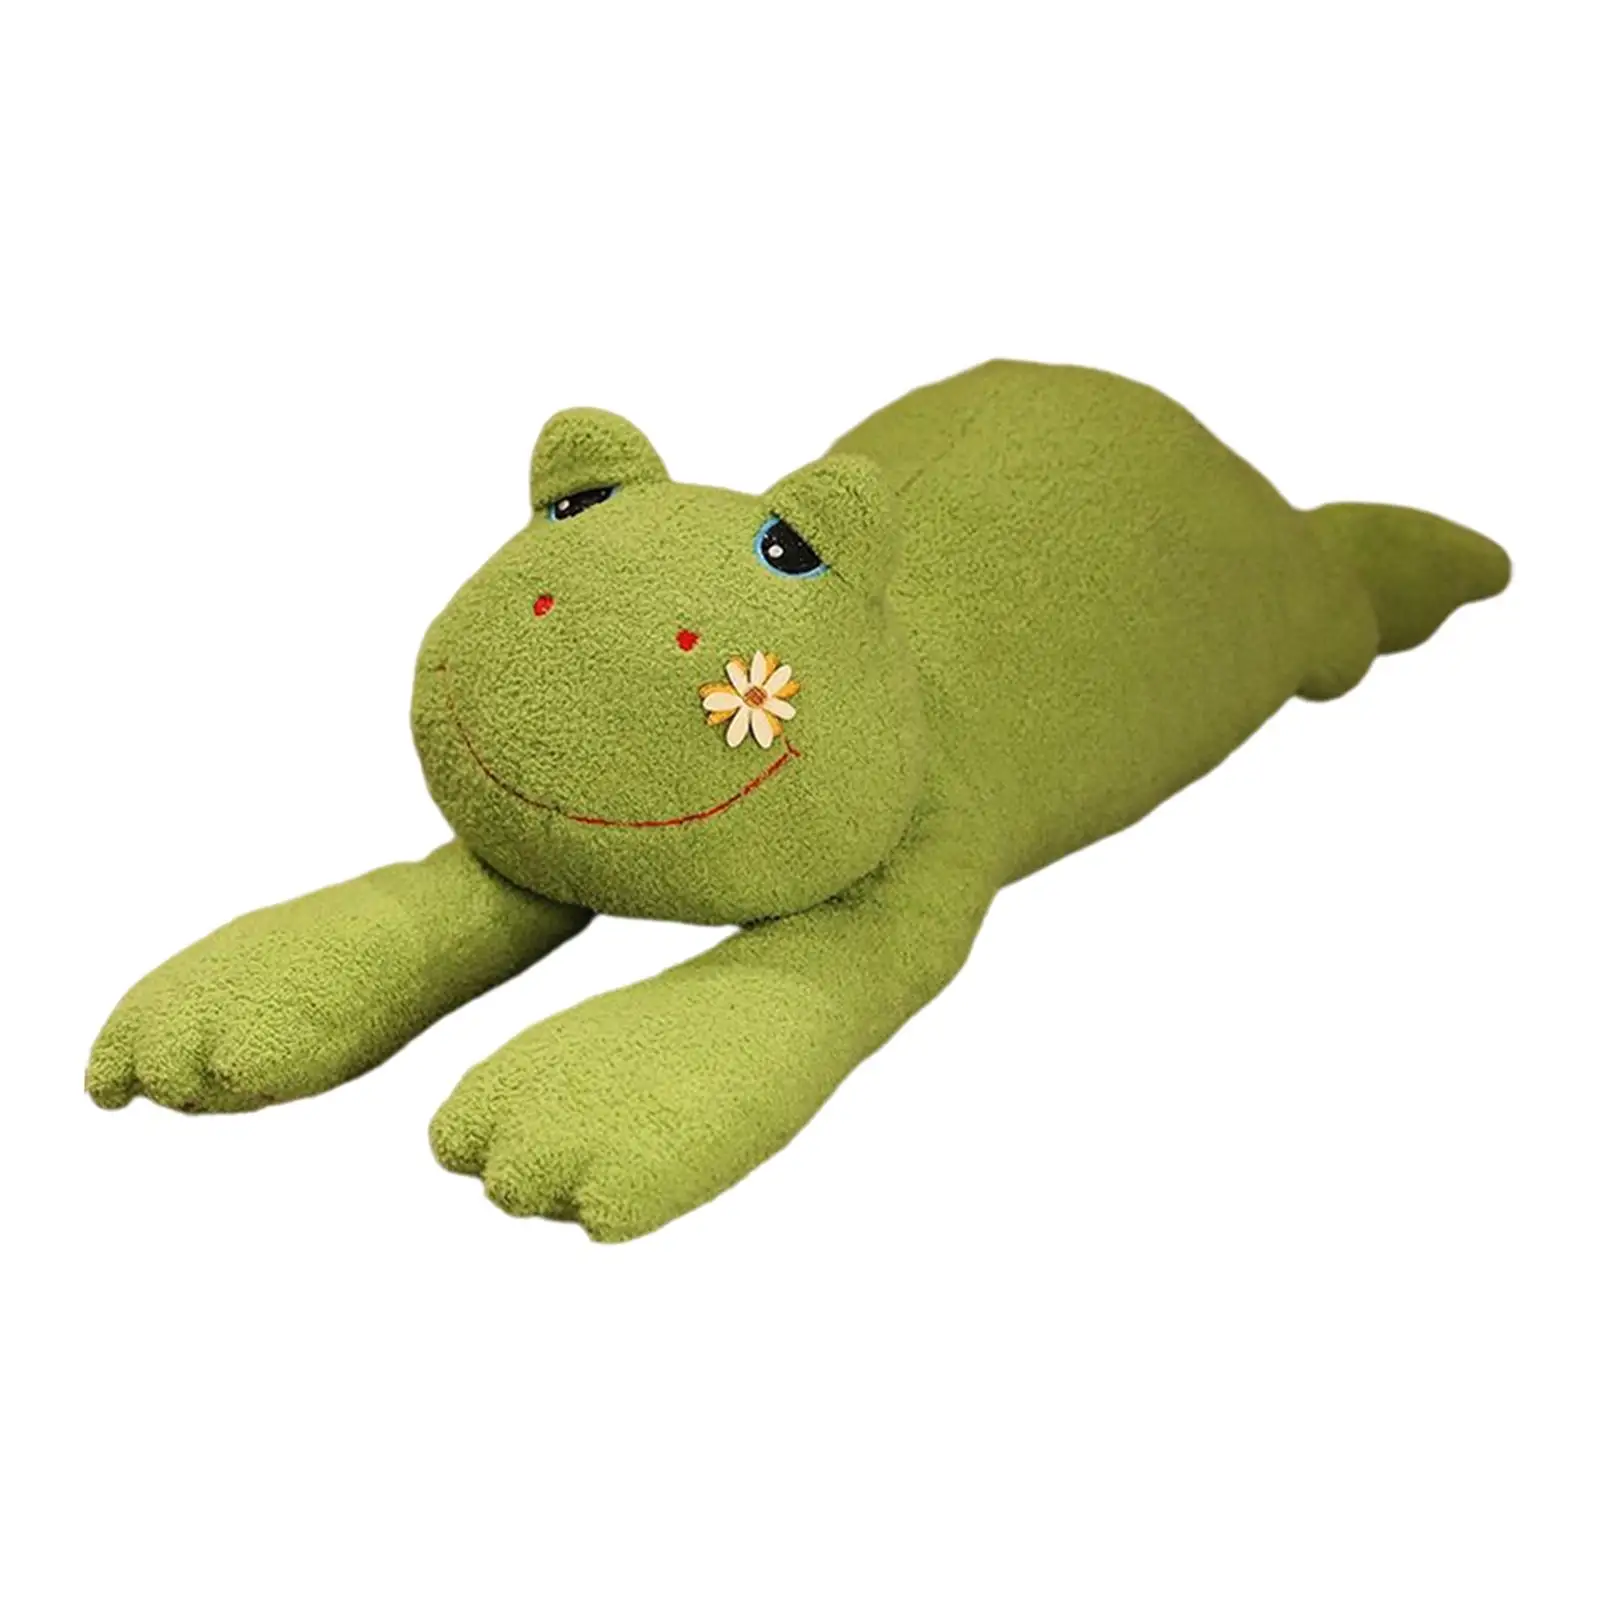 Cuddly Frog Plush Doll pillow Adorable Stuffed Animal for Theme Party Birthday Gifts Holiday Children Toddlers